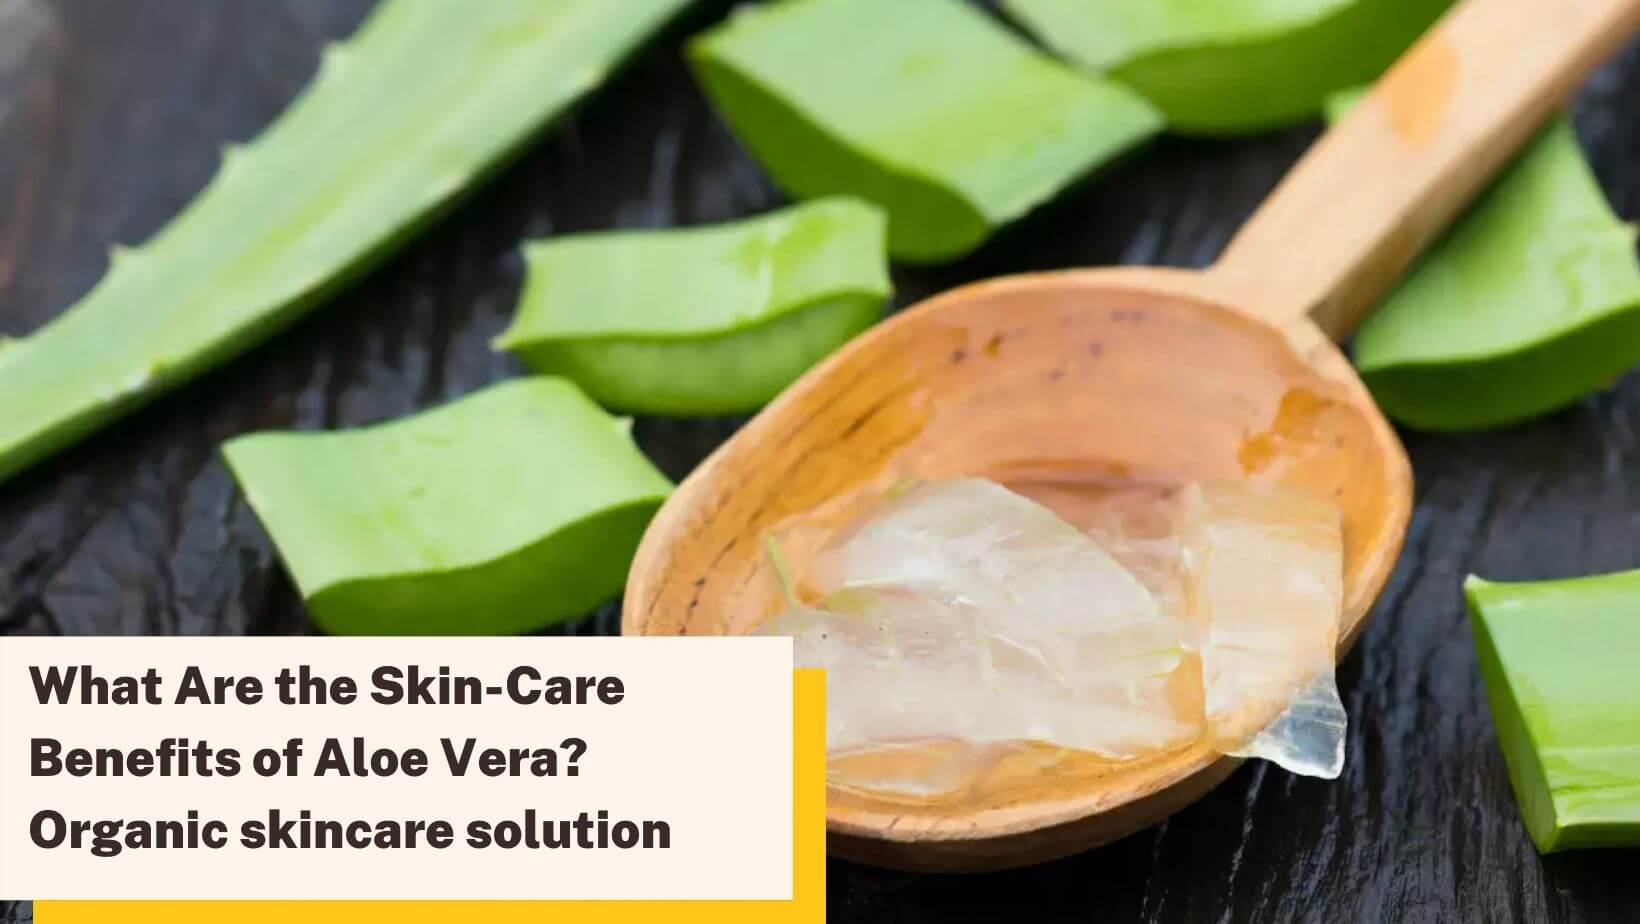 What Are the Skincare Benefits of Aloe Vera?